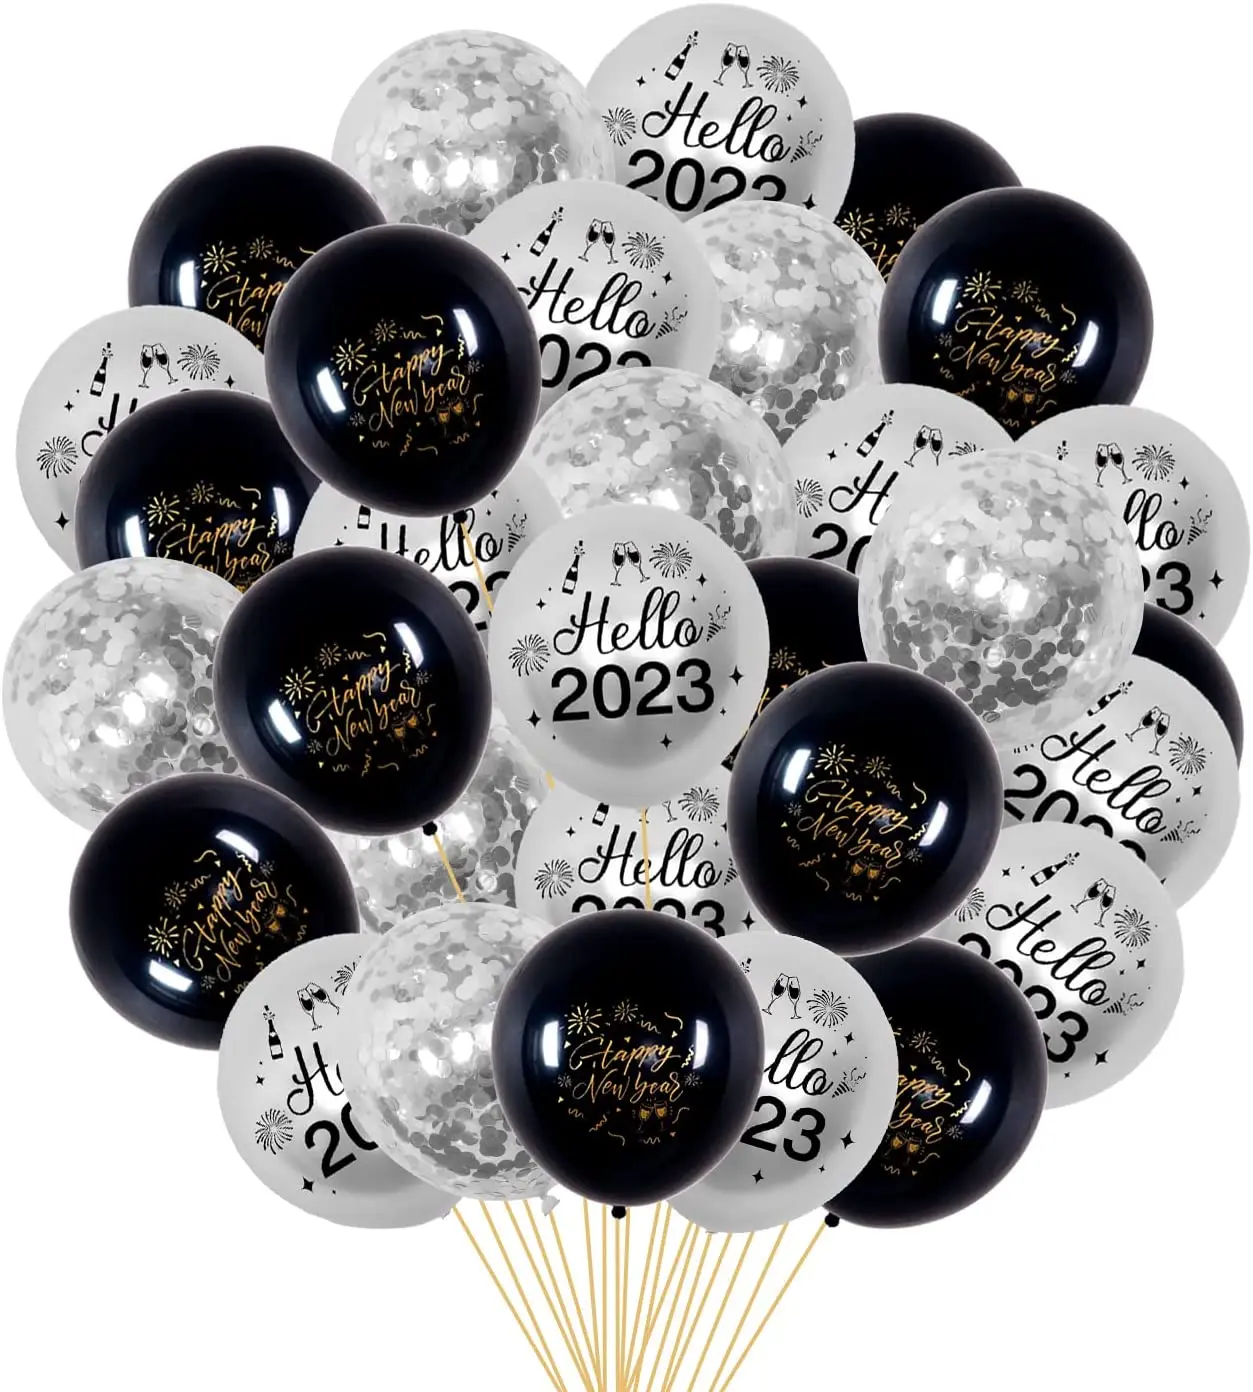 

Funmemoir 40pcs Happy New Year Latex Confetti Balloons Set Silver Black 2023 New Years Decorations New Years Eve Party Supplies